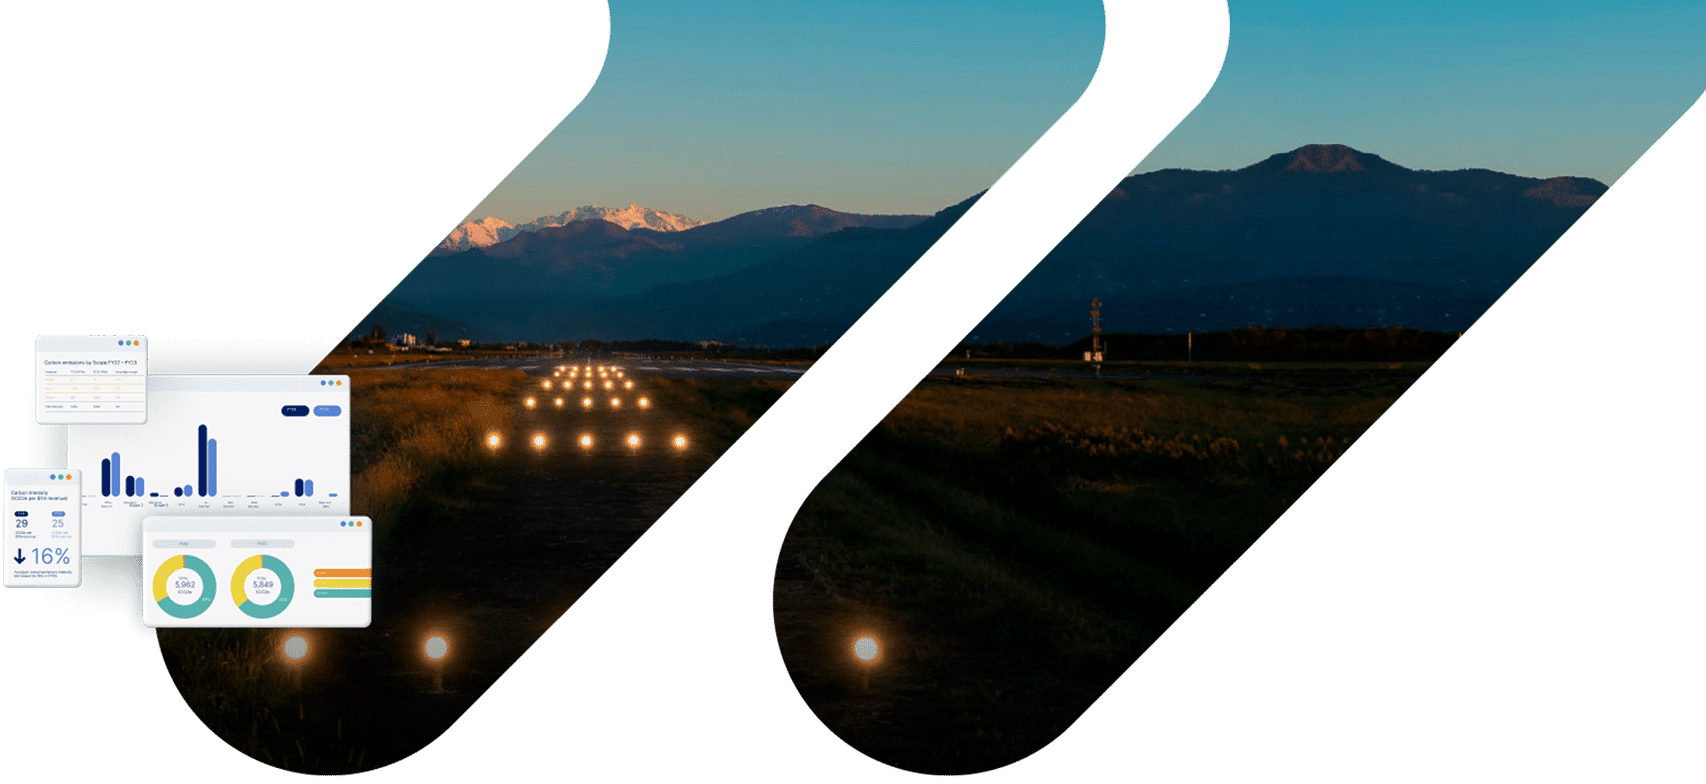 Airplane Runway with Mountains in Background Accelya Global